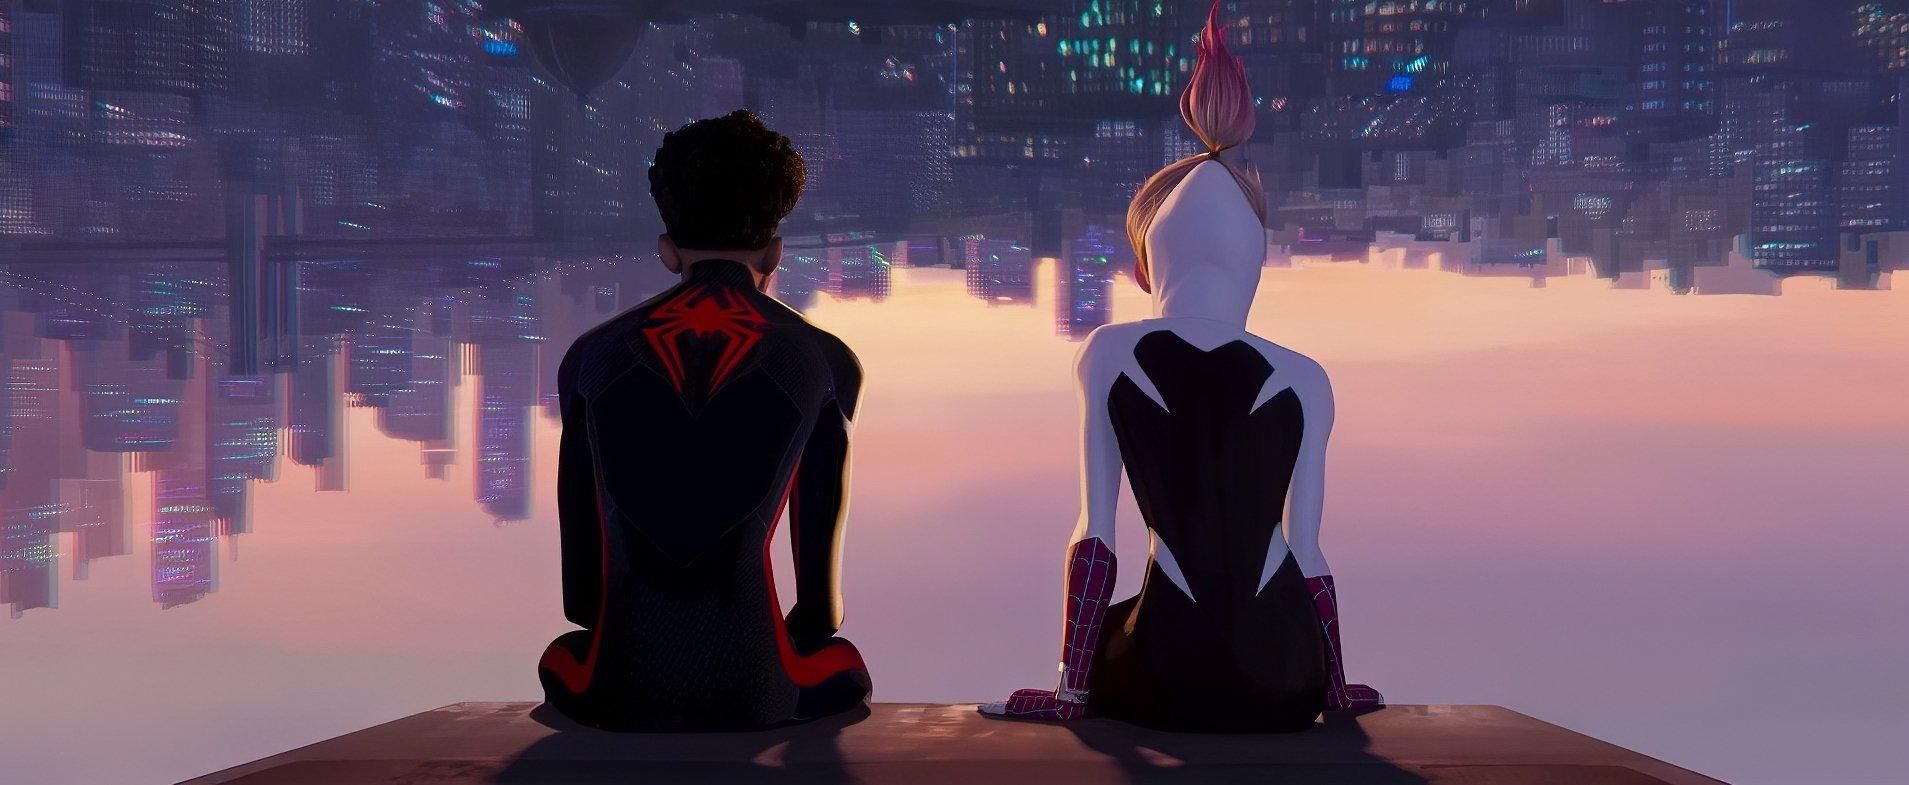 Spider-Man: Into the Spider-Verse Review! - Comic Book Herald